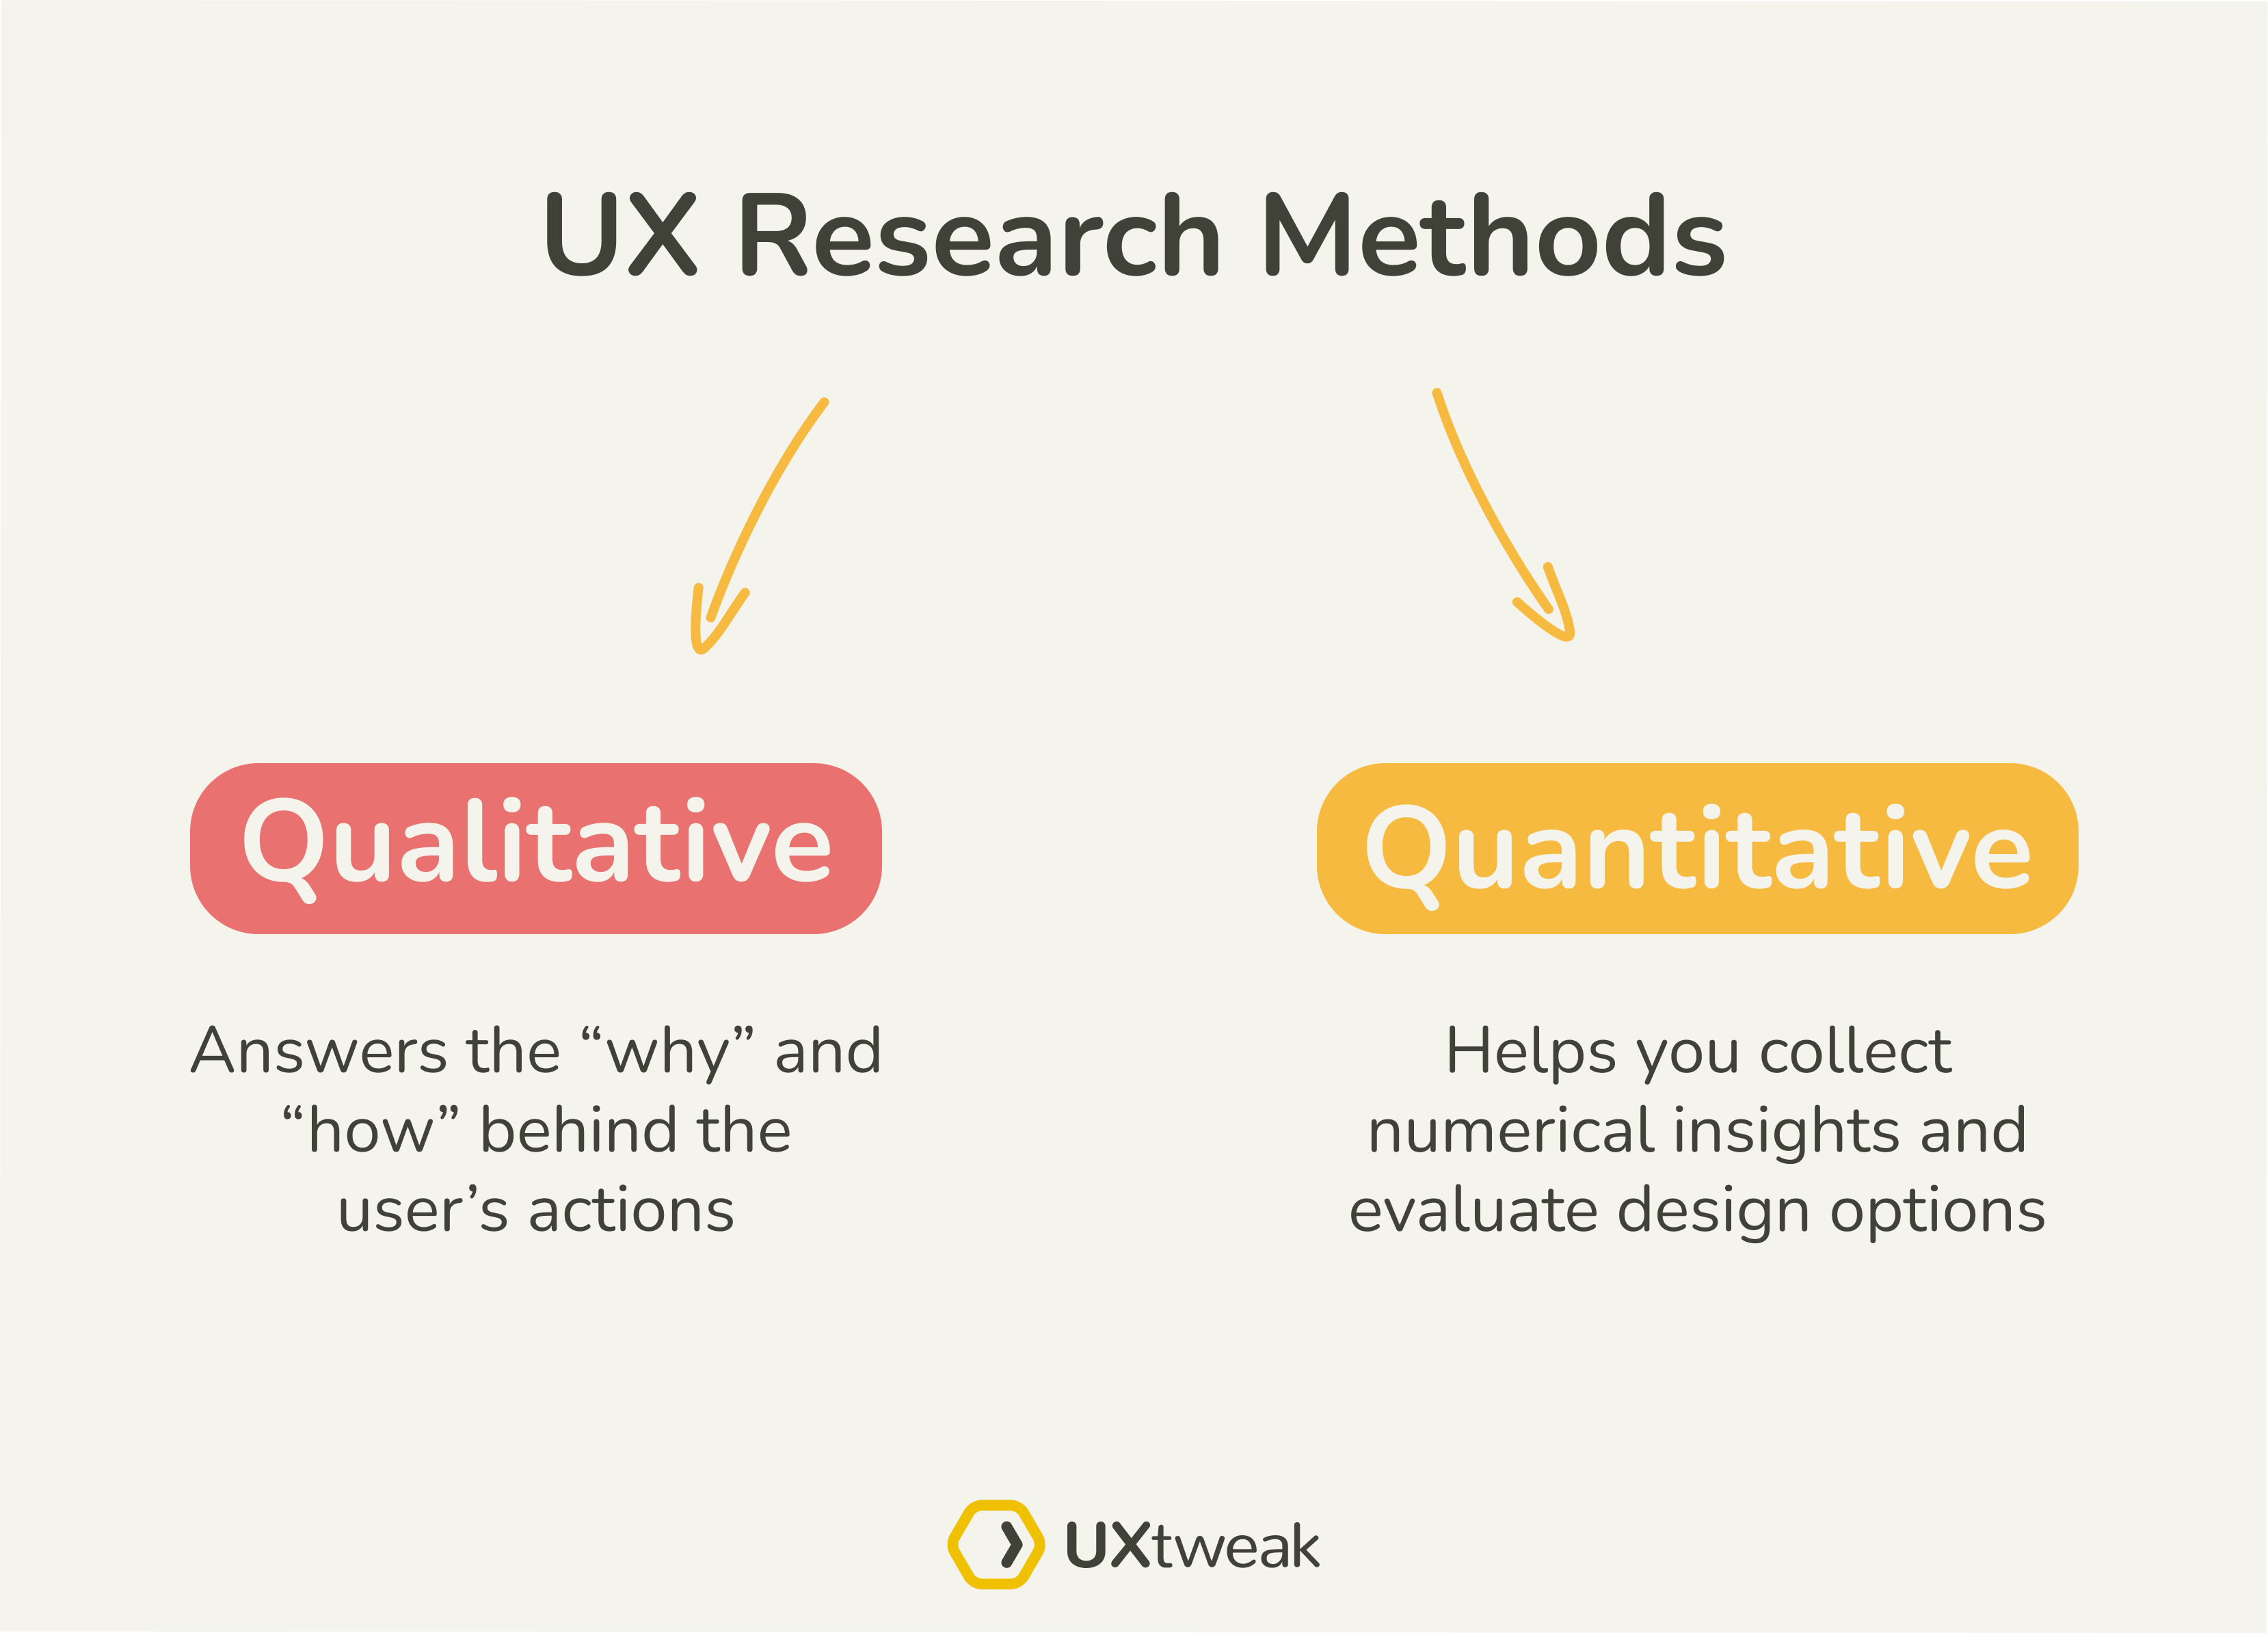 ux research methods